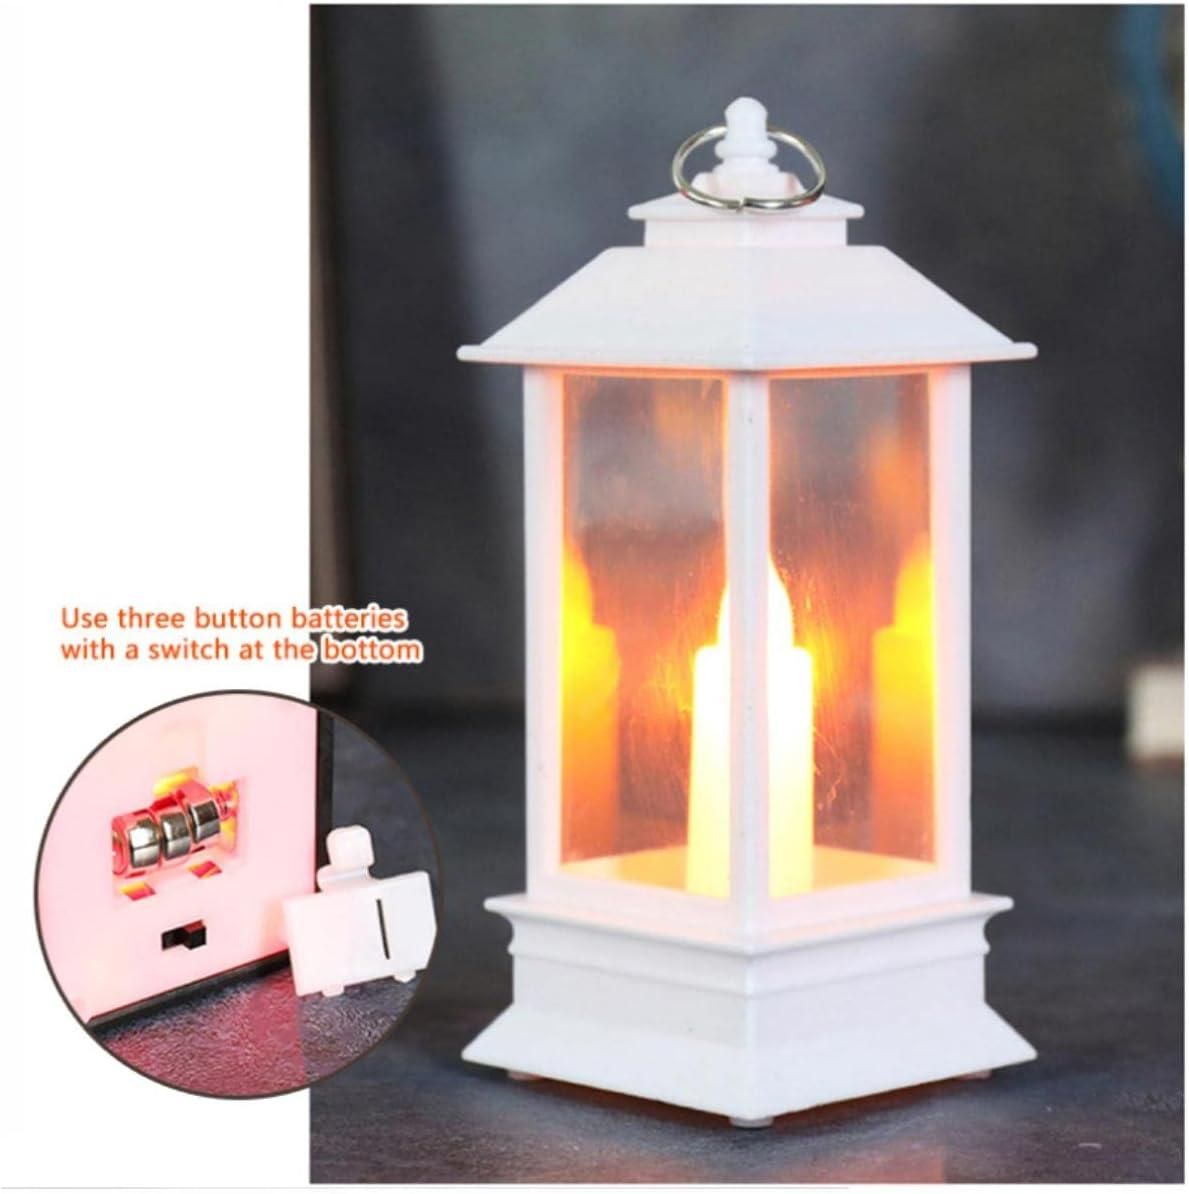 Pack of 6 Decorative Lanterns with Hanging LED Pillar Candles, Battery Operated